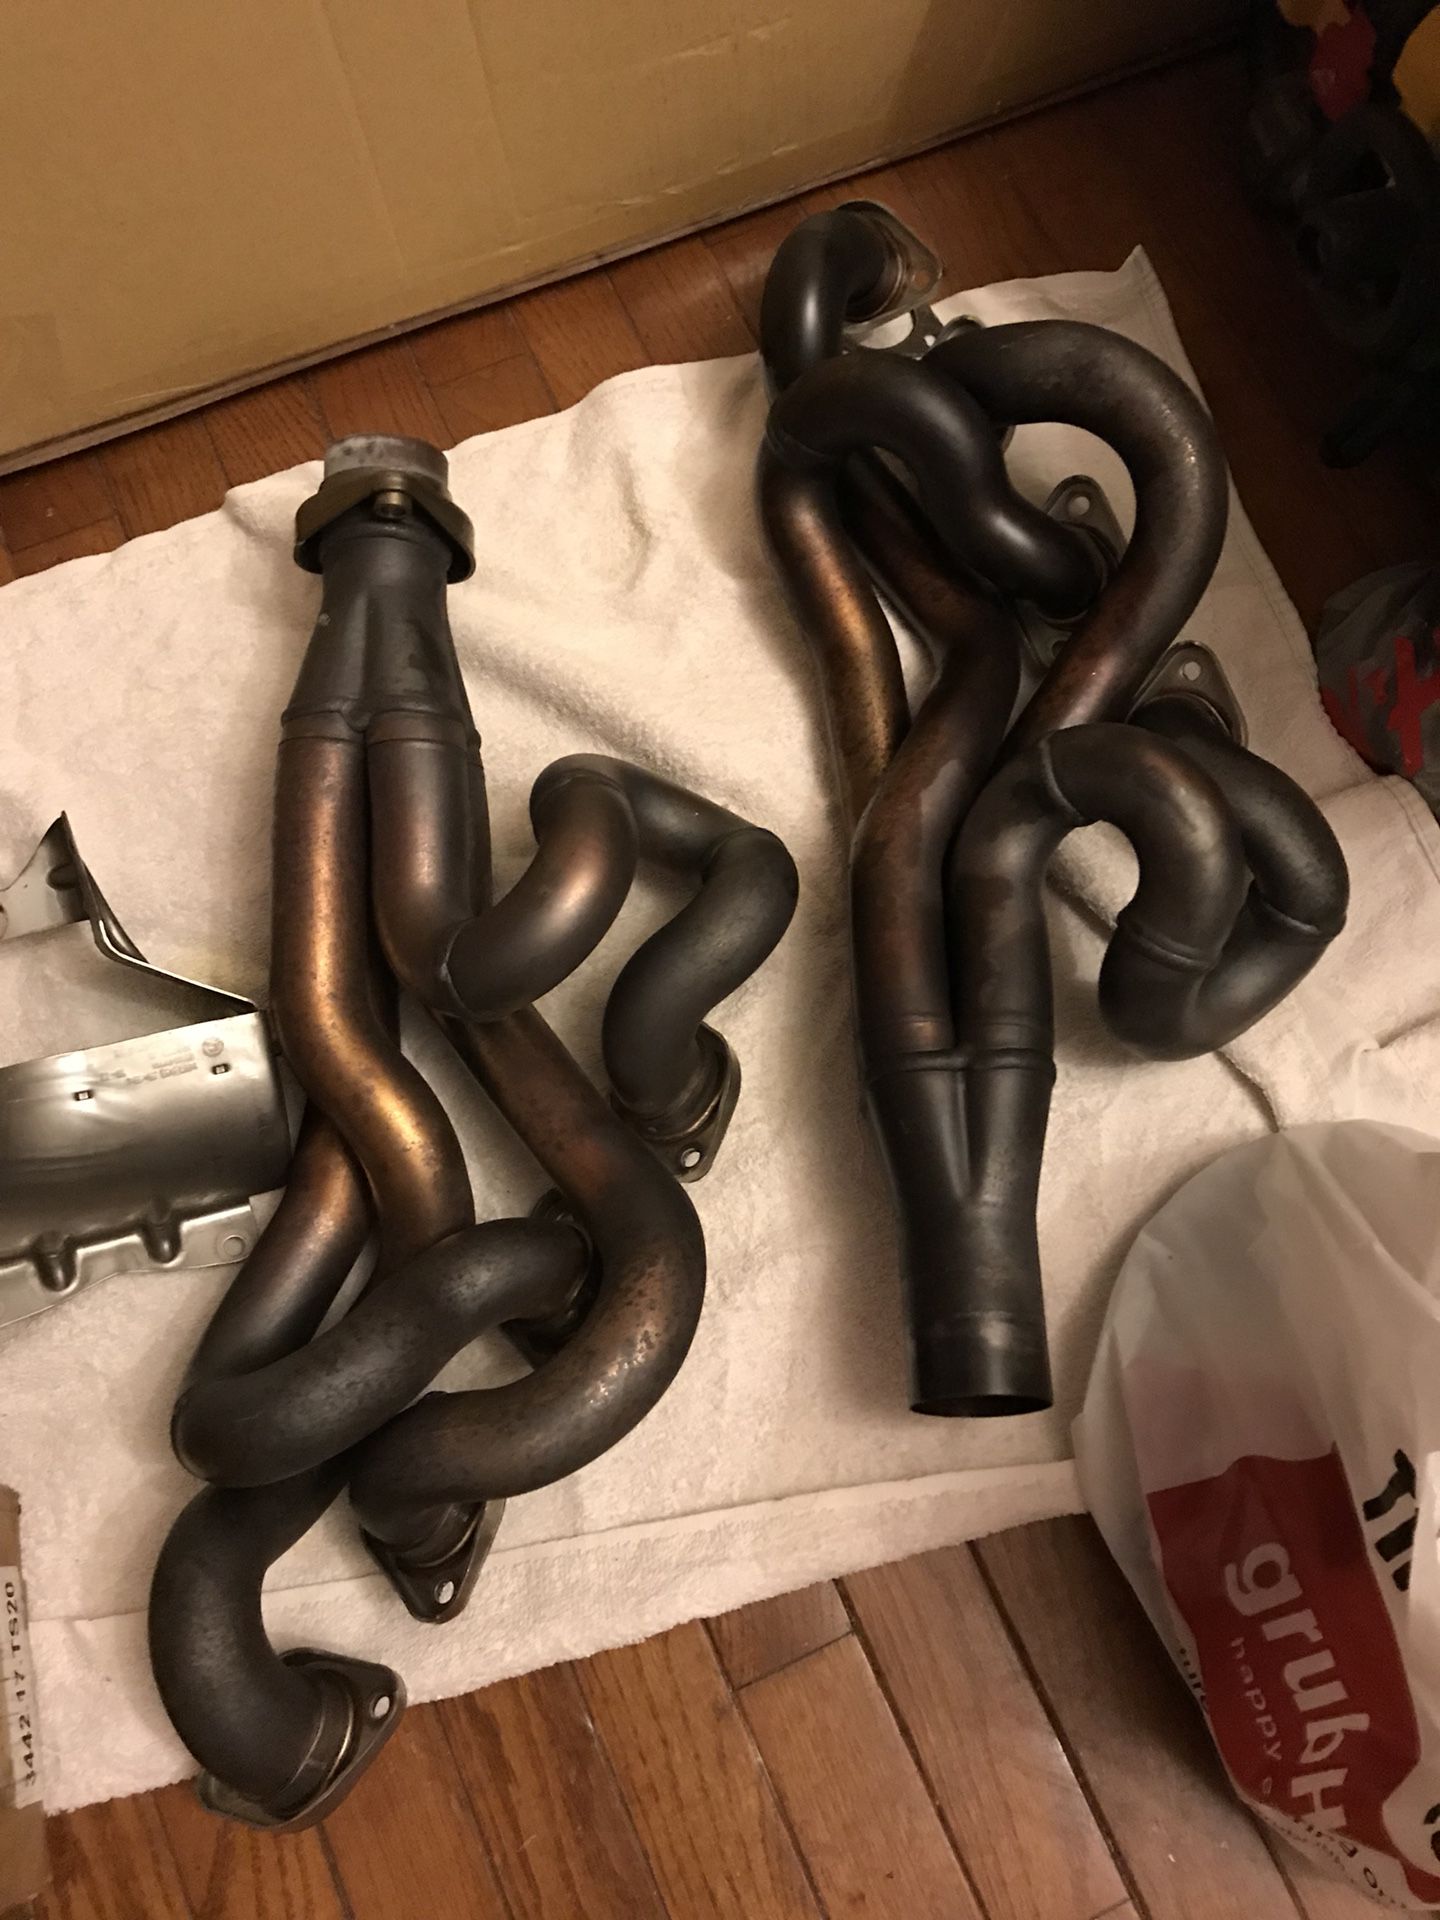 E93 bmw M3 engine part out heads, cams, headers. Etc